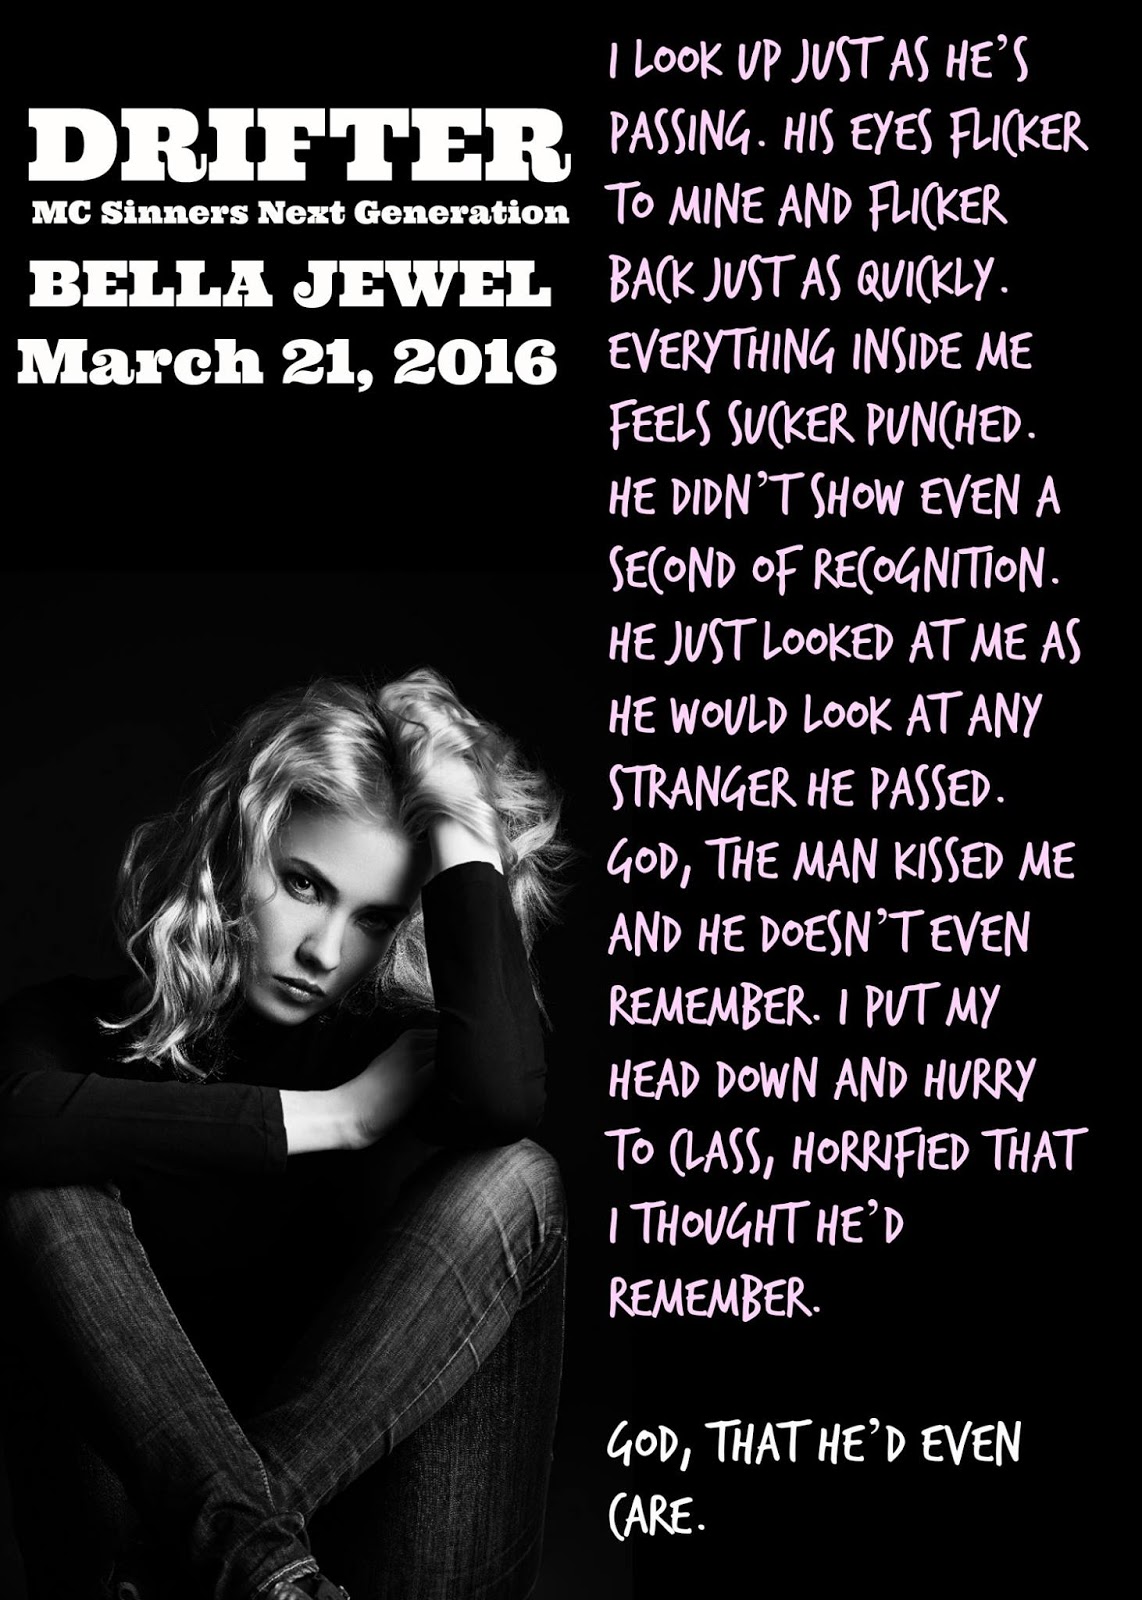 Category Drifter-by-bella-jewel-release-blitz-giveaway picture